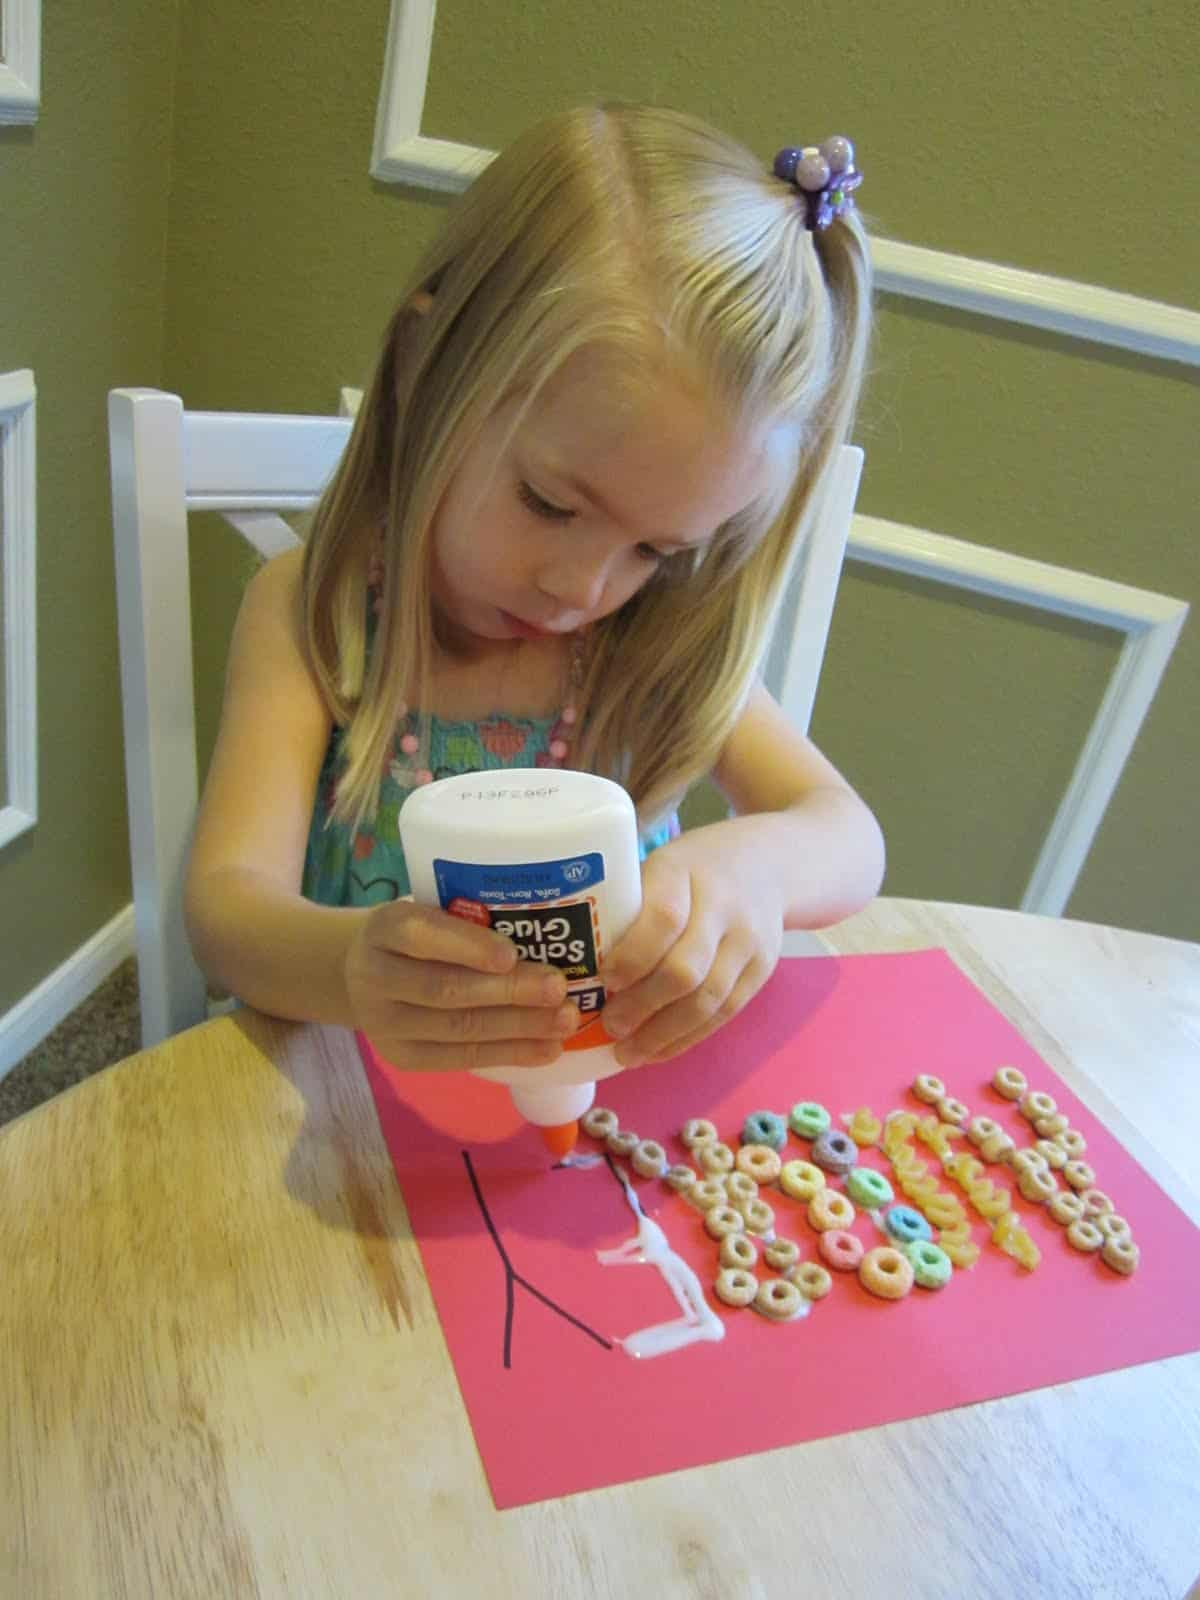 DIY Learning Activities For Toddlers
 29 Fun And Creative DIY Games To Get Your Kids Learning